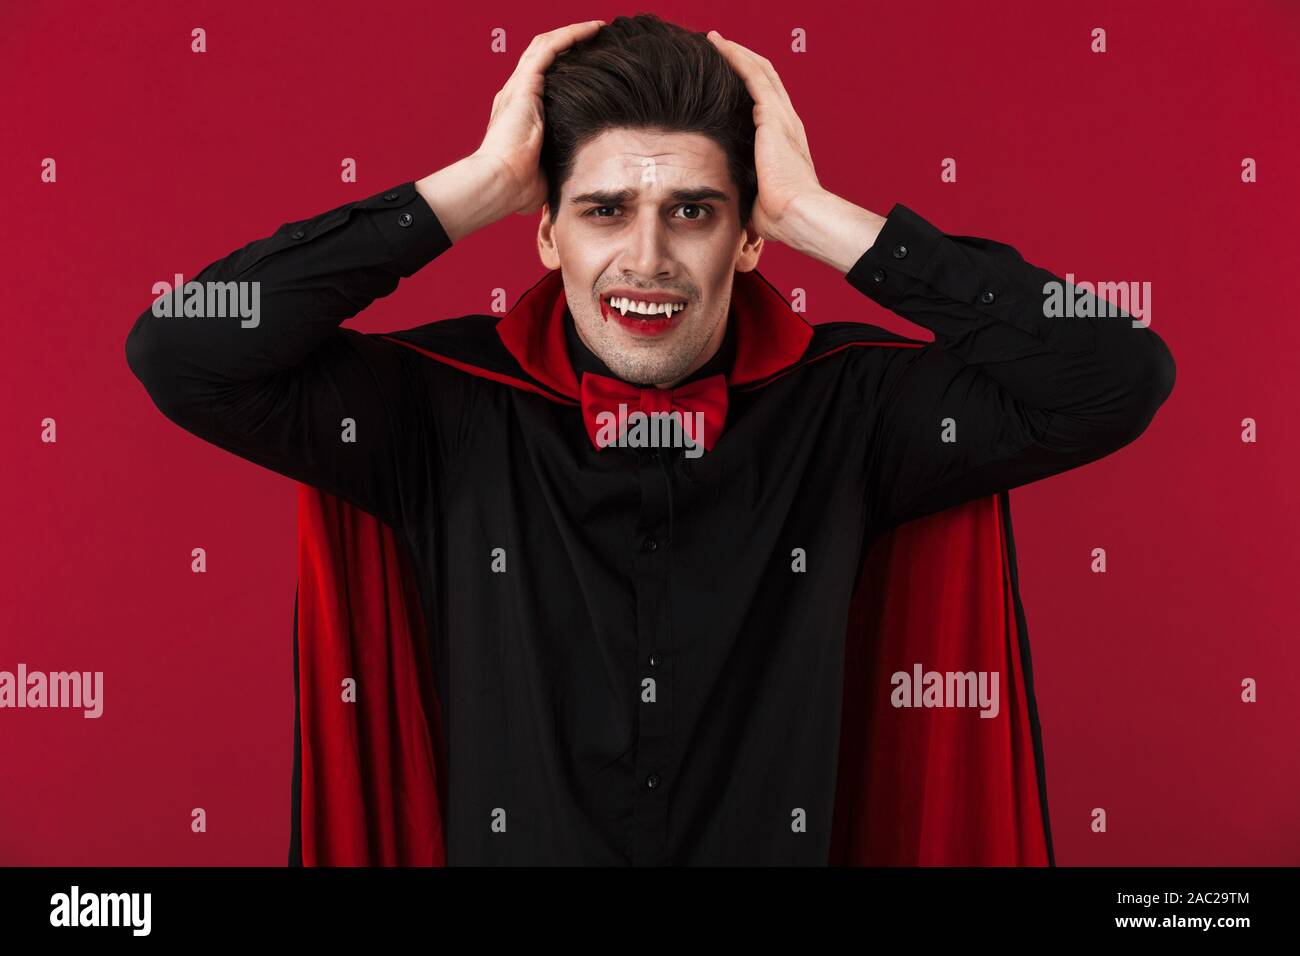 Image Of Shocked Vampire Man With Blood And Fangs In Black